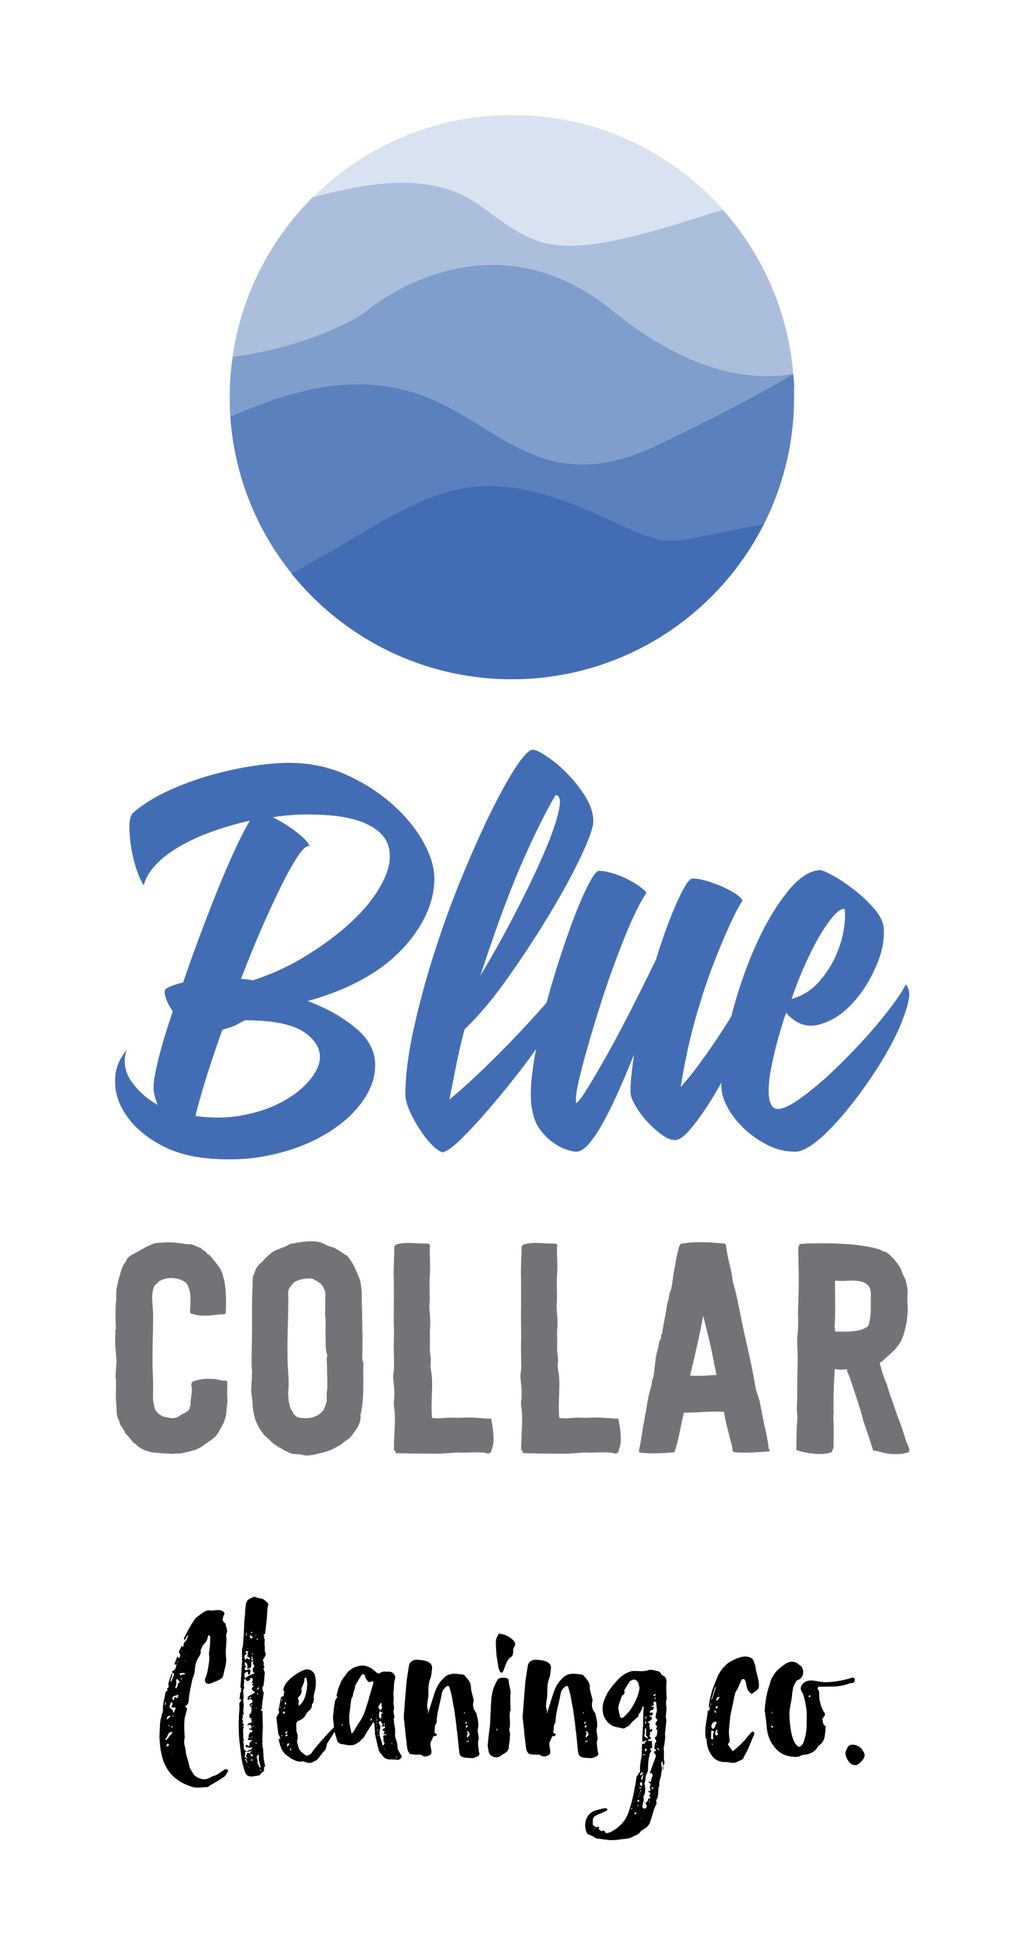 Blue Collar Cleaning Co.